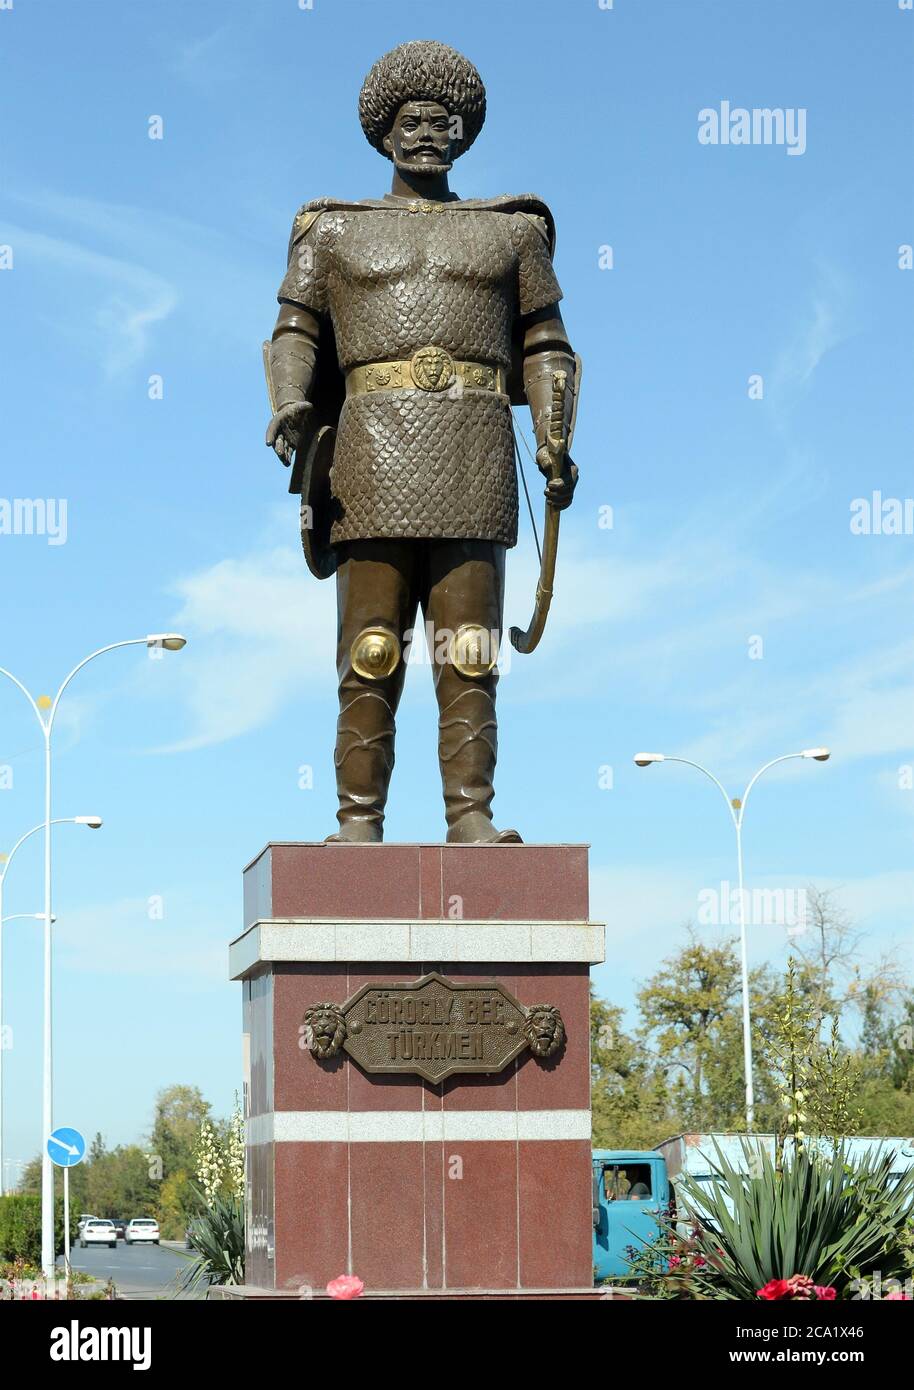 Koroghlu Beg Turkmen statue in Mary, Turkmenistan. Also know as Gorogly Beg. Heroic legend prominent in the oral traditions of the Turkic peoples. Stock Photo